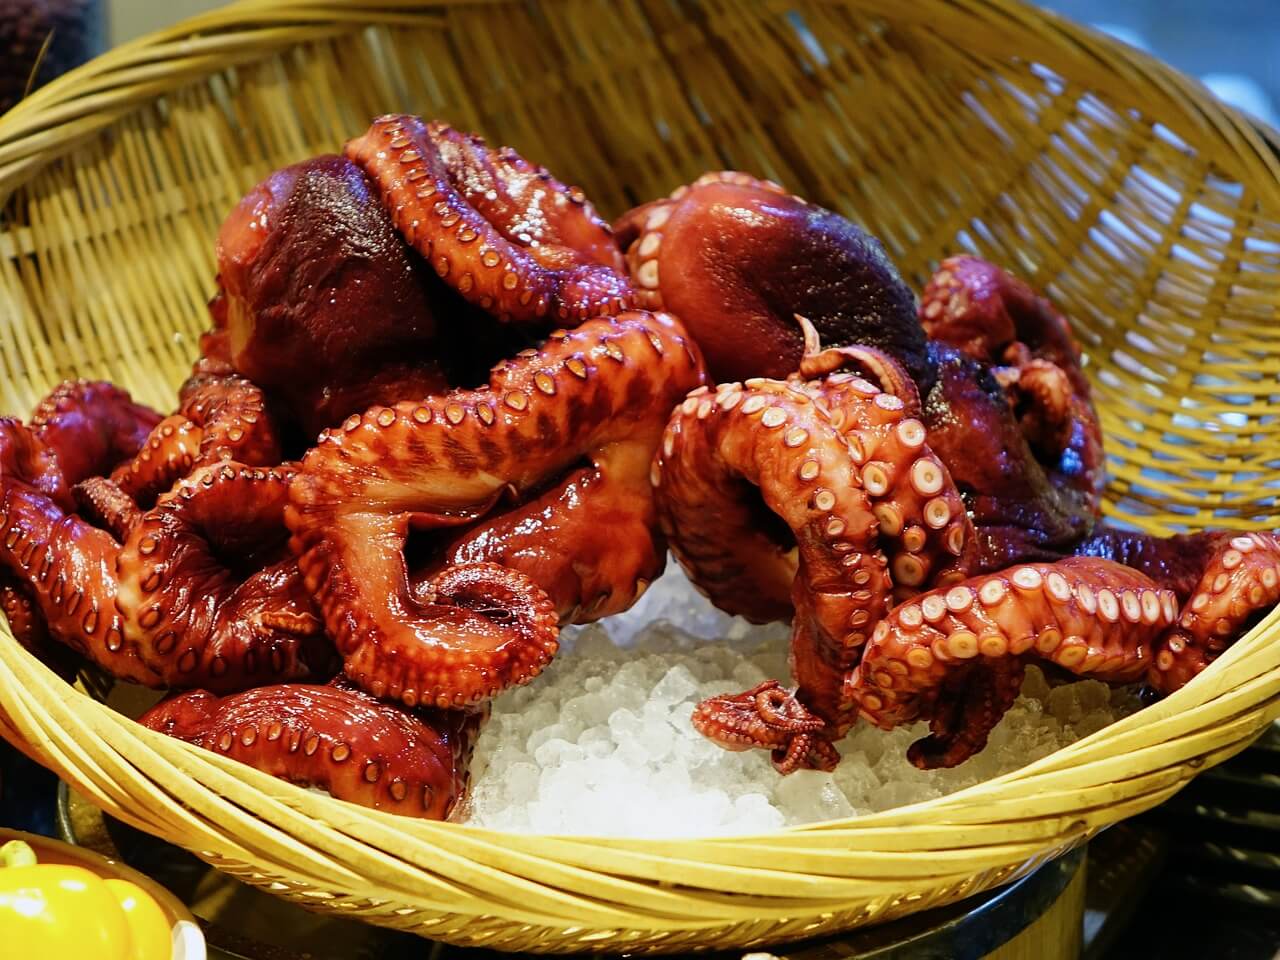 Watch: Octopus Stabbed and Eaten ALIVE